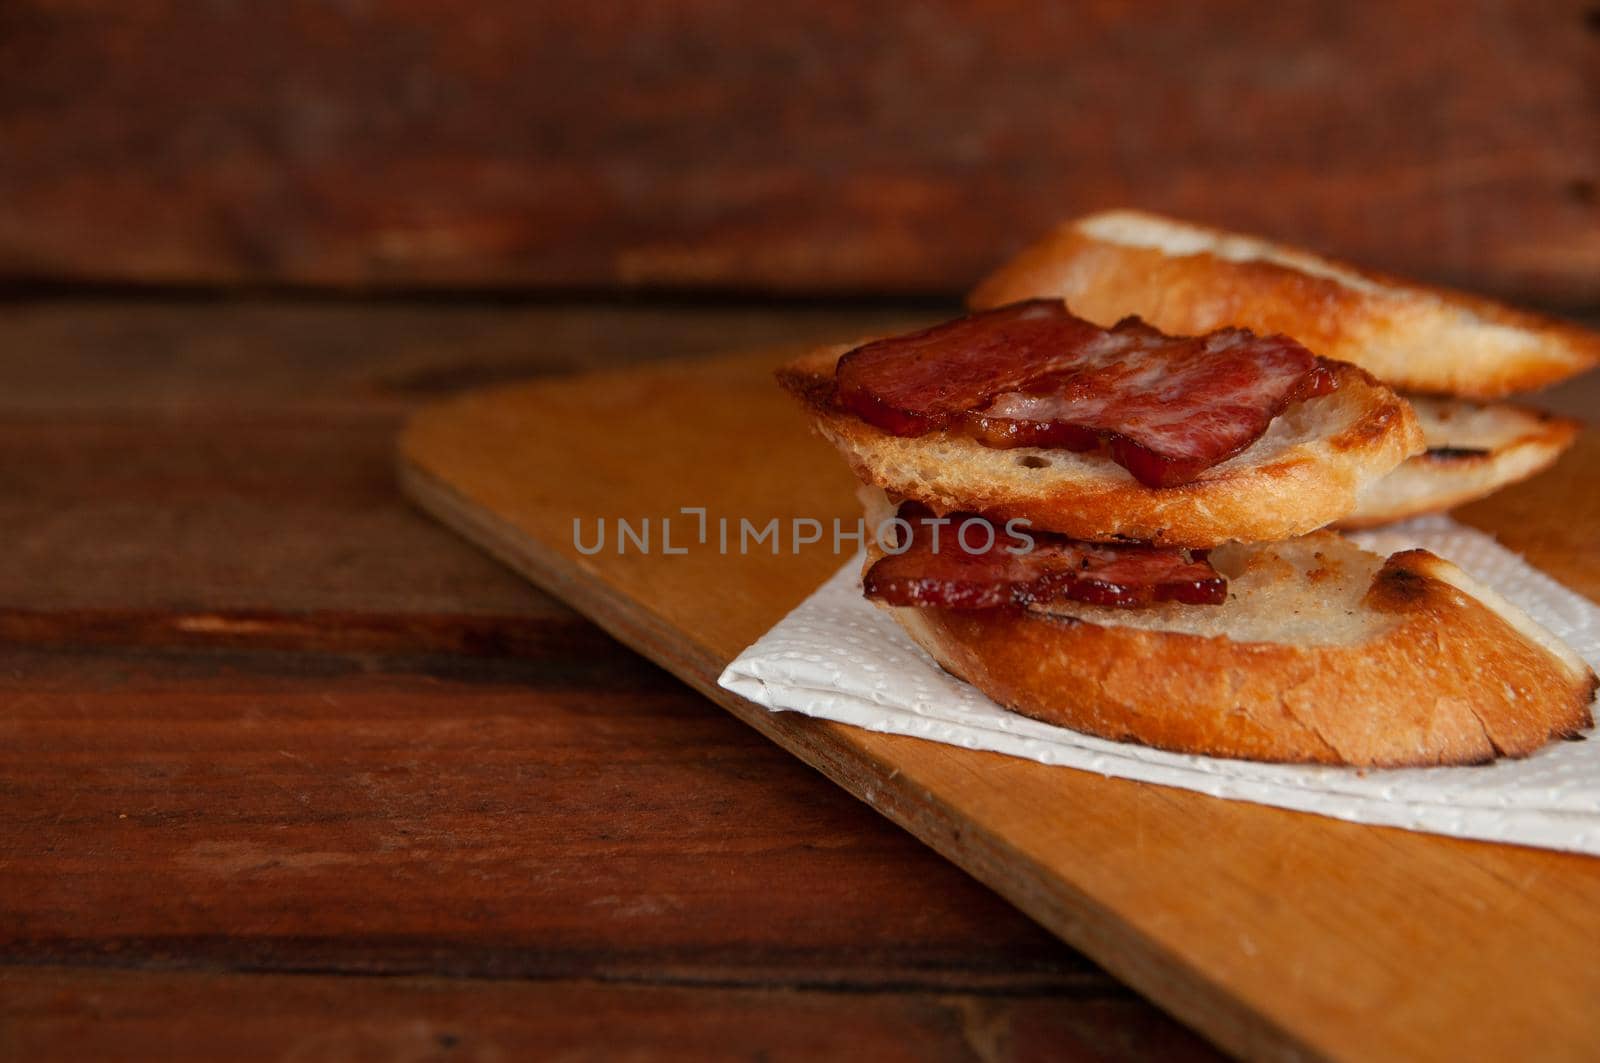 Using thick-sliced bacon to make a sandwich on whole-grain bread.